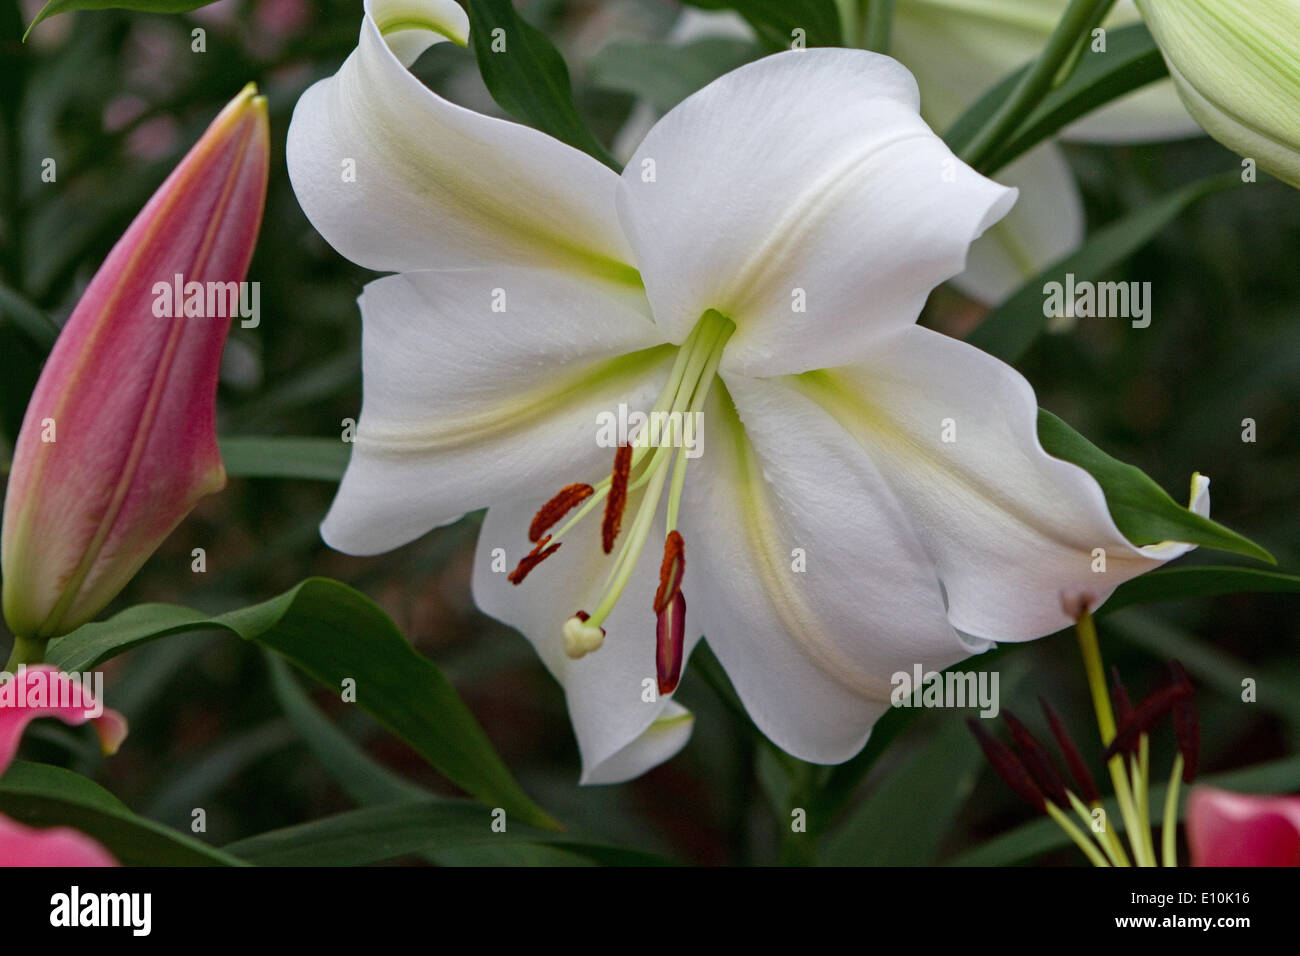 Chelsea,20th May 2014,Lillies on display at the RHS Chelsea Flower Show 201 Credit: Keith Larby/ALamy Live News Stock Photo